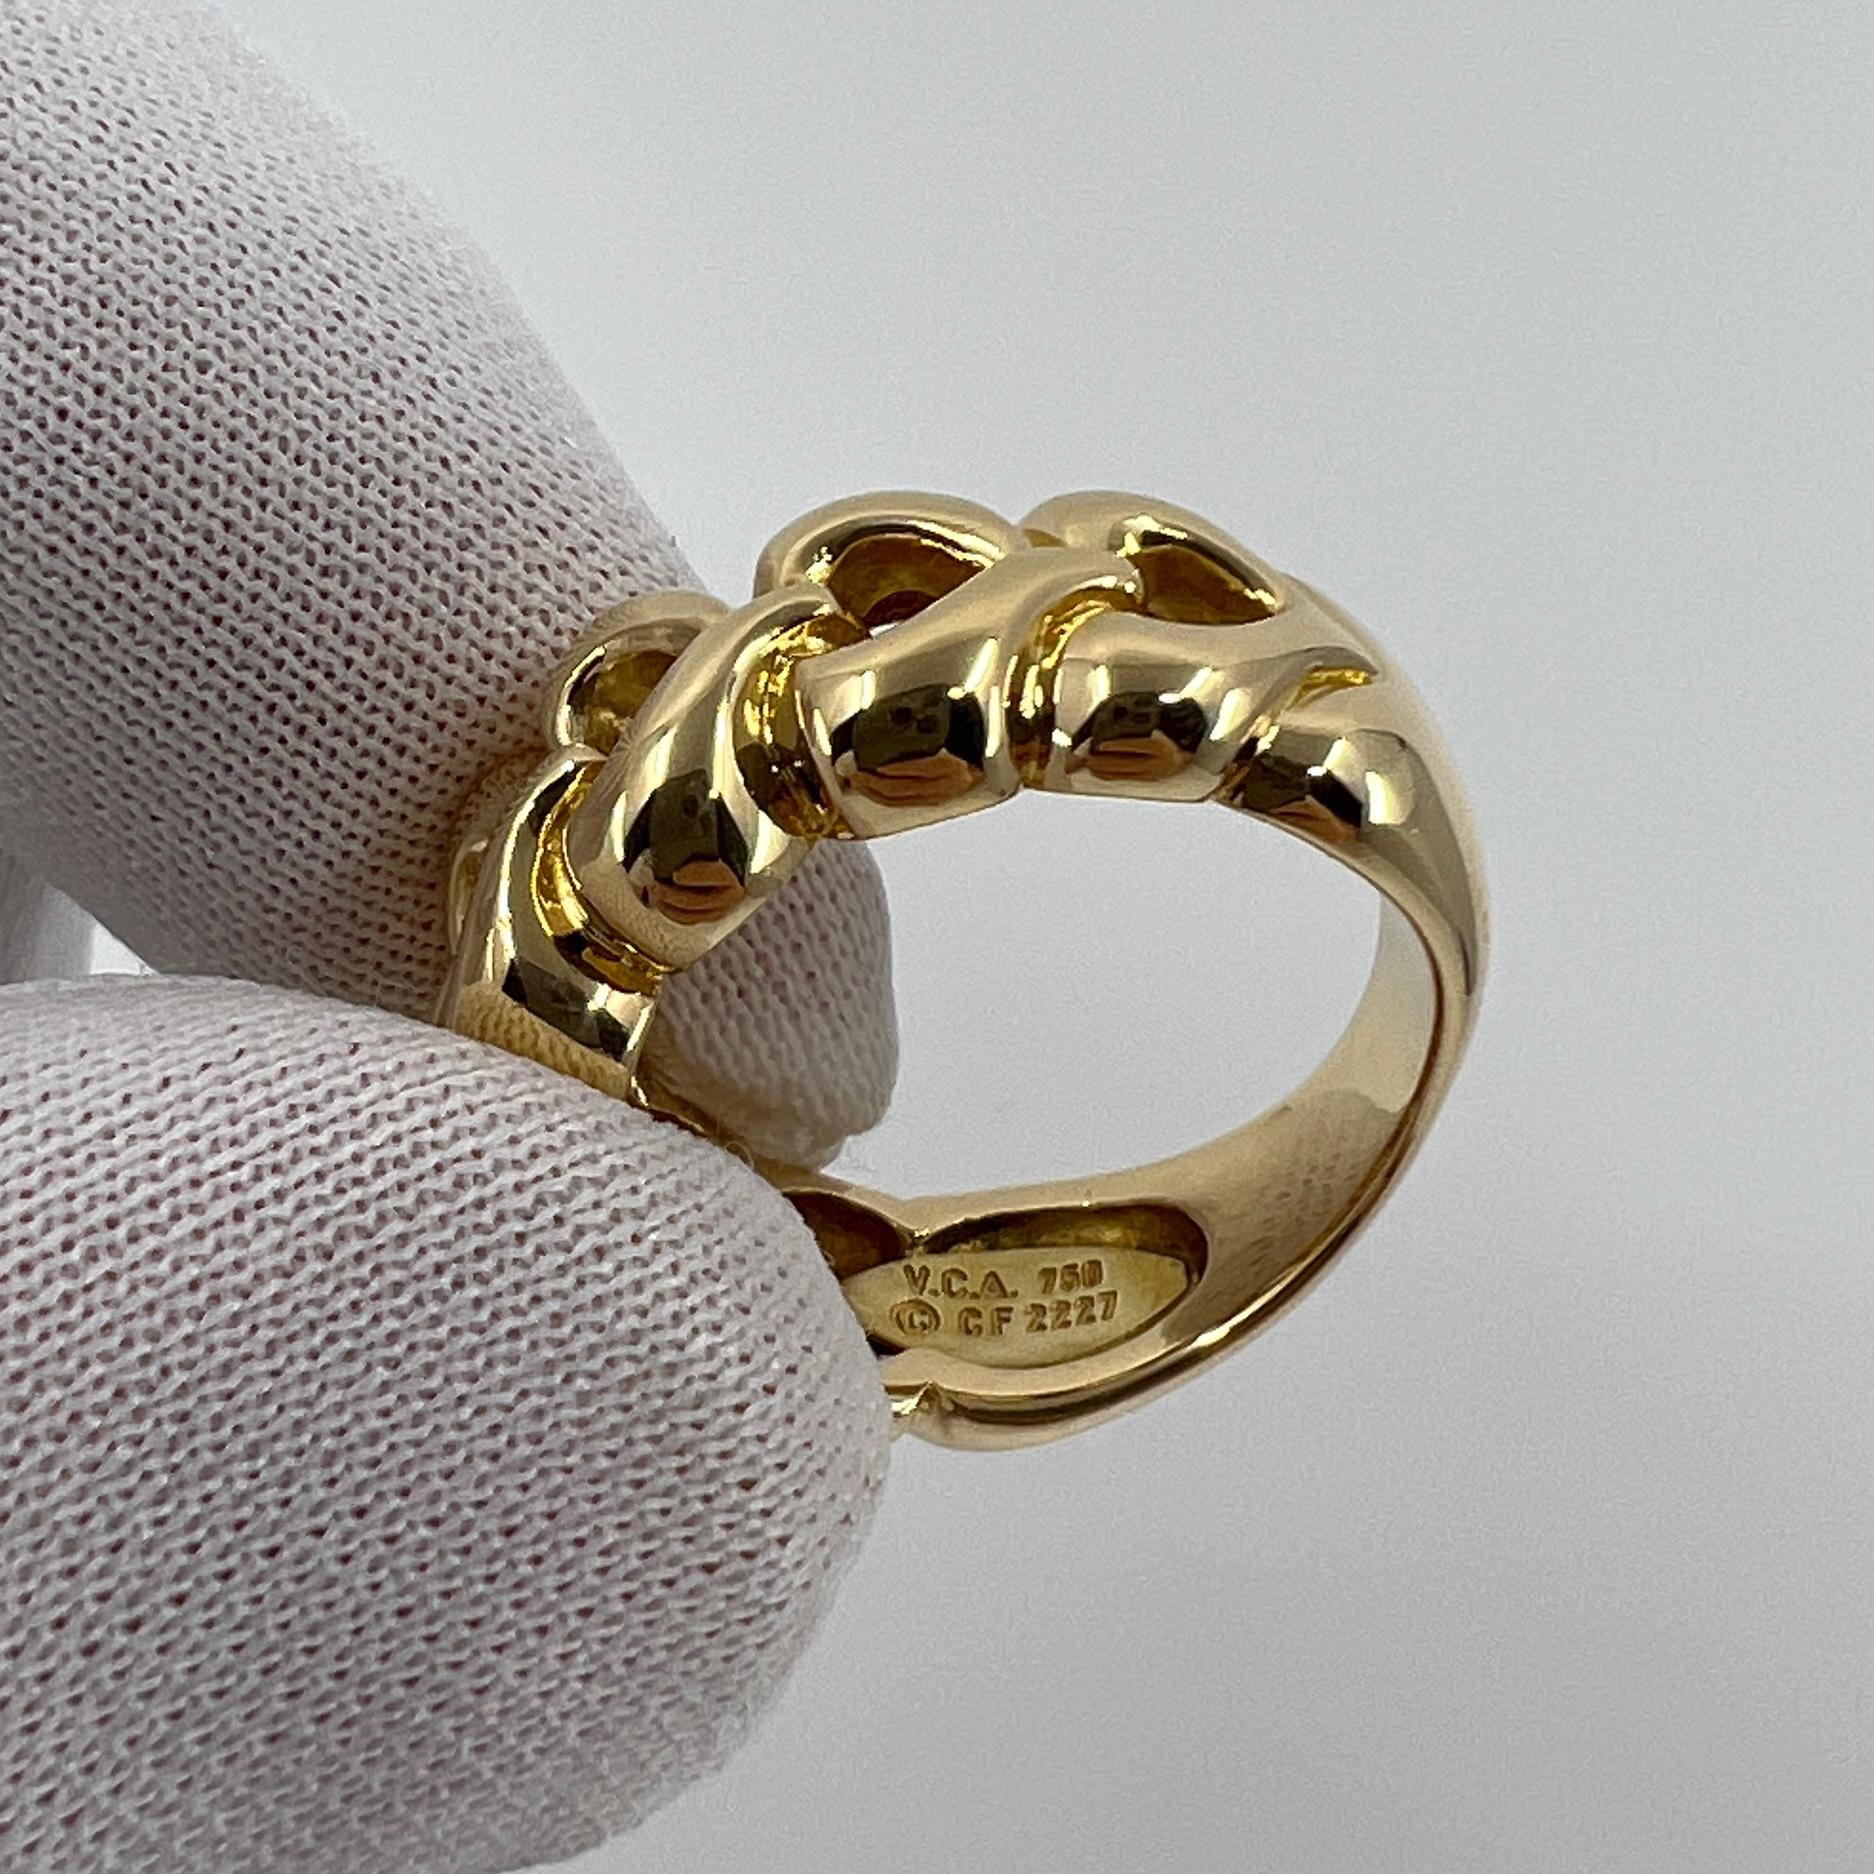 Rare Vintage Van Cleef & Arpels 18k Yellow Gold Open Heart Band Ring with Box For Sale 8